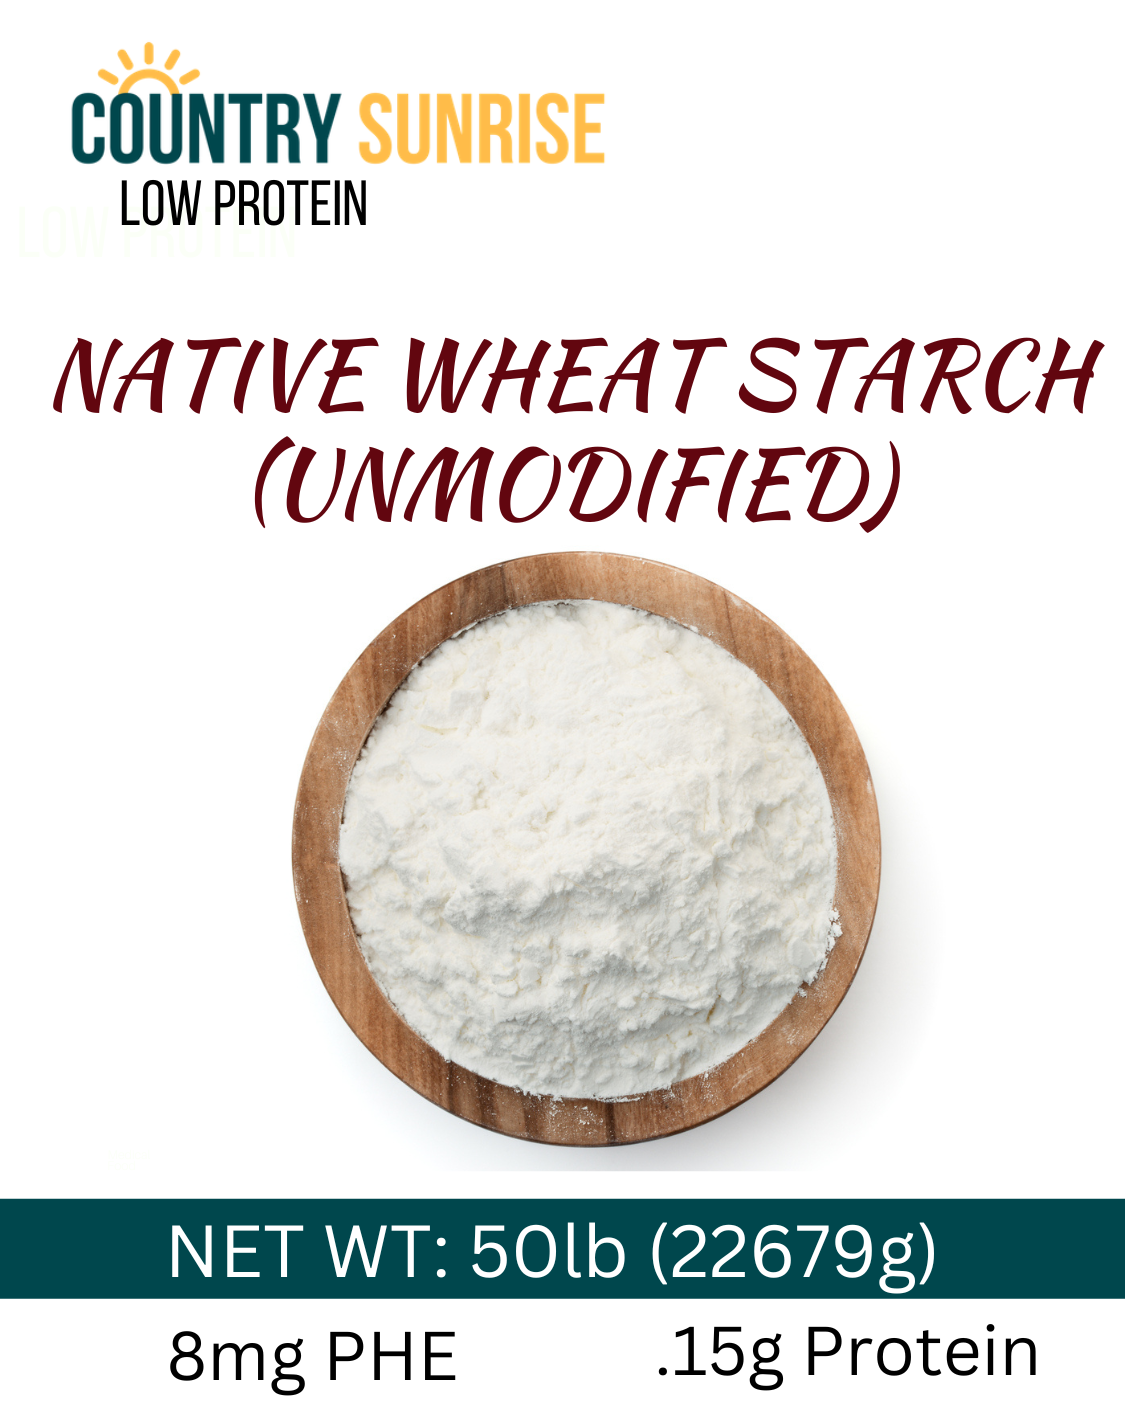 Starch in Food- What is Native Wheat Starch?